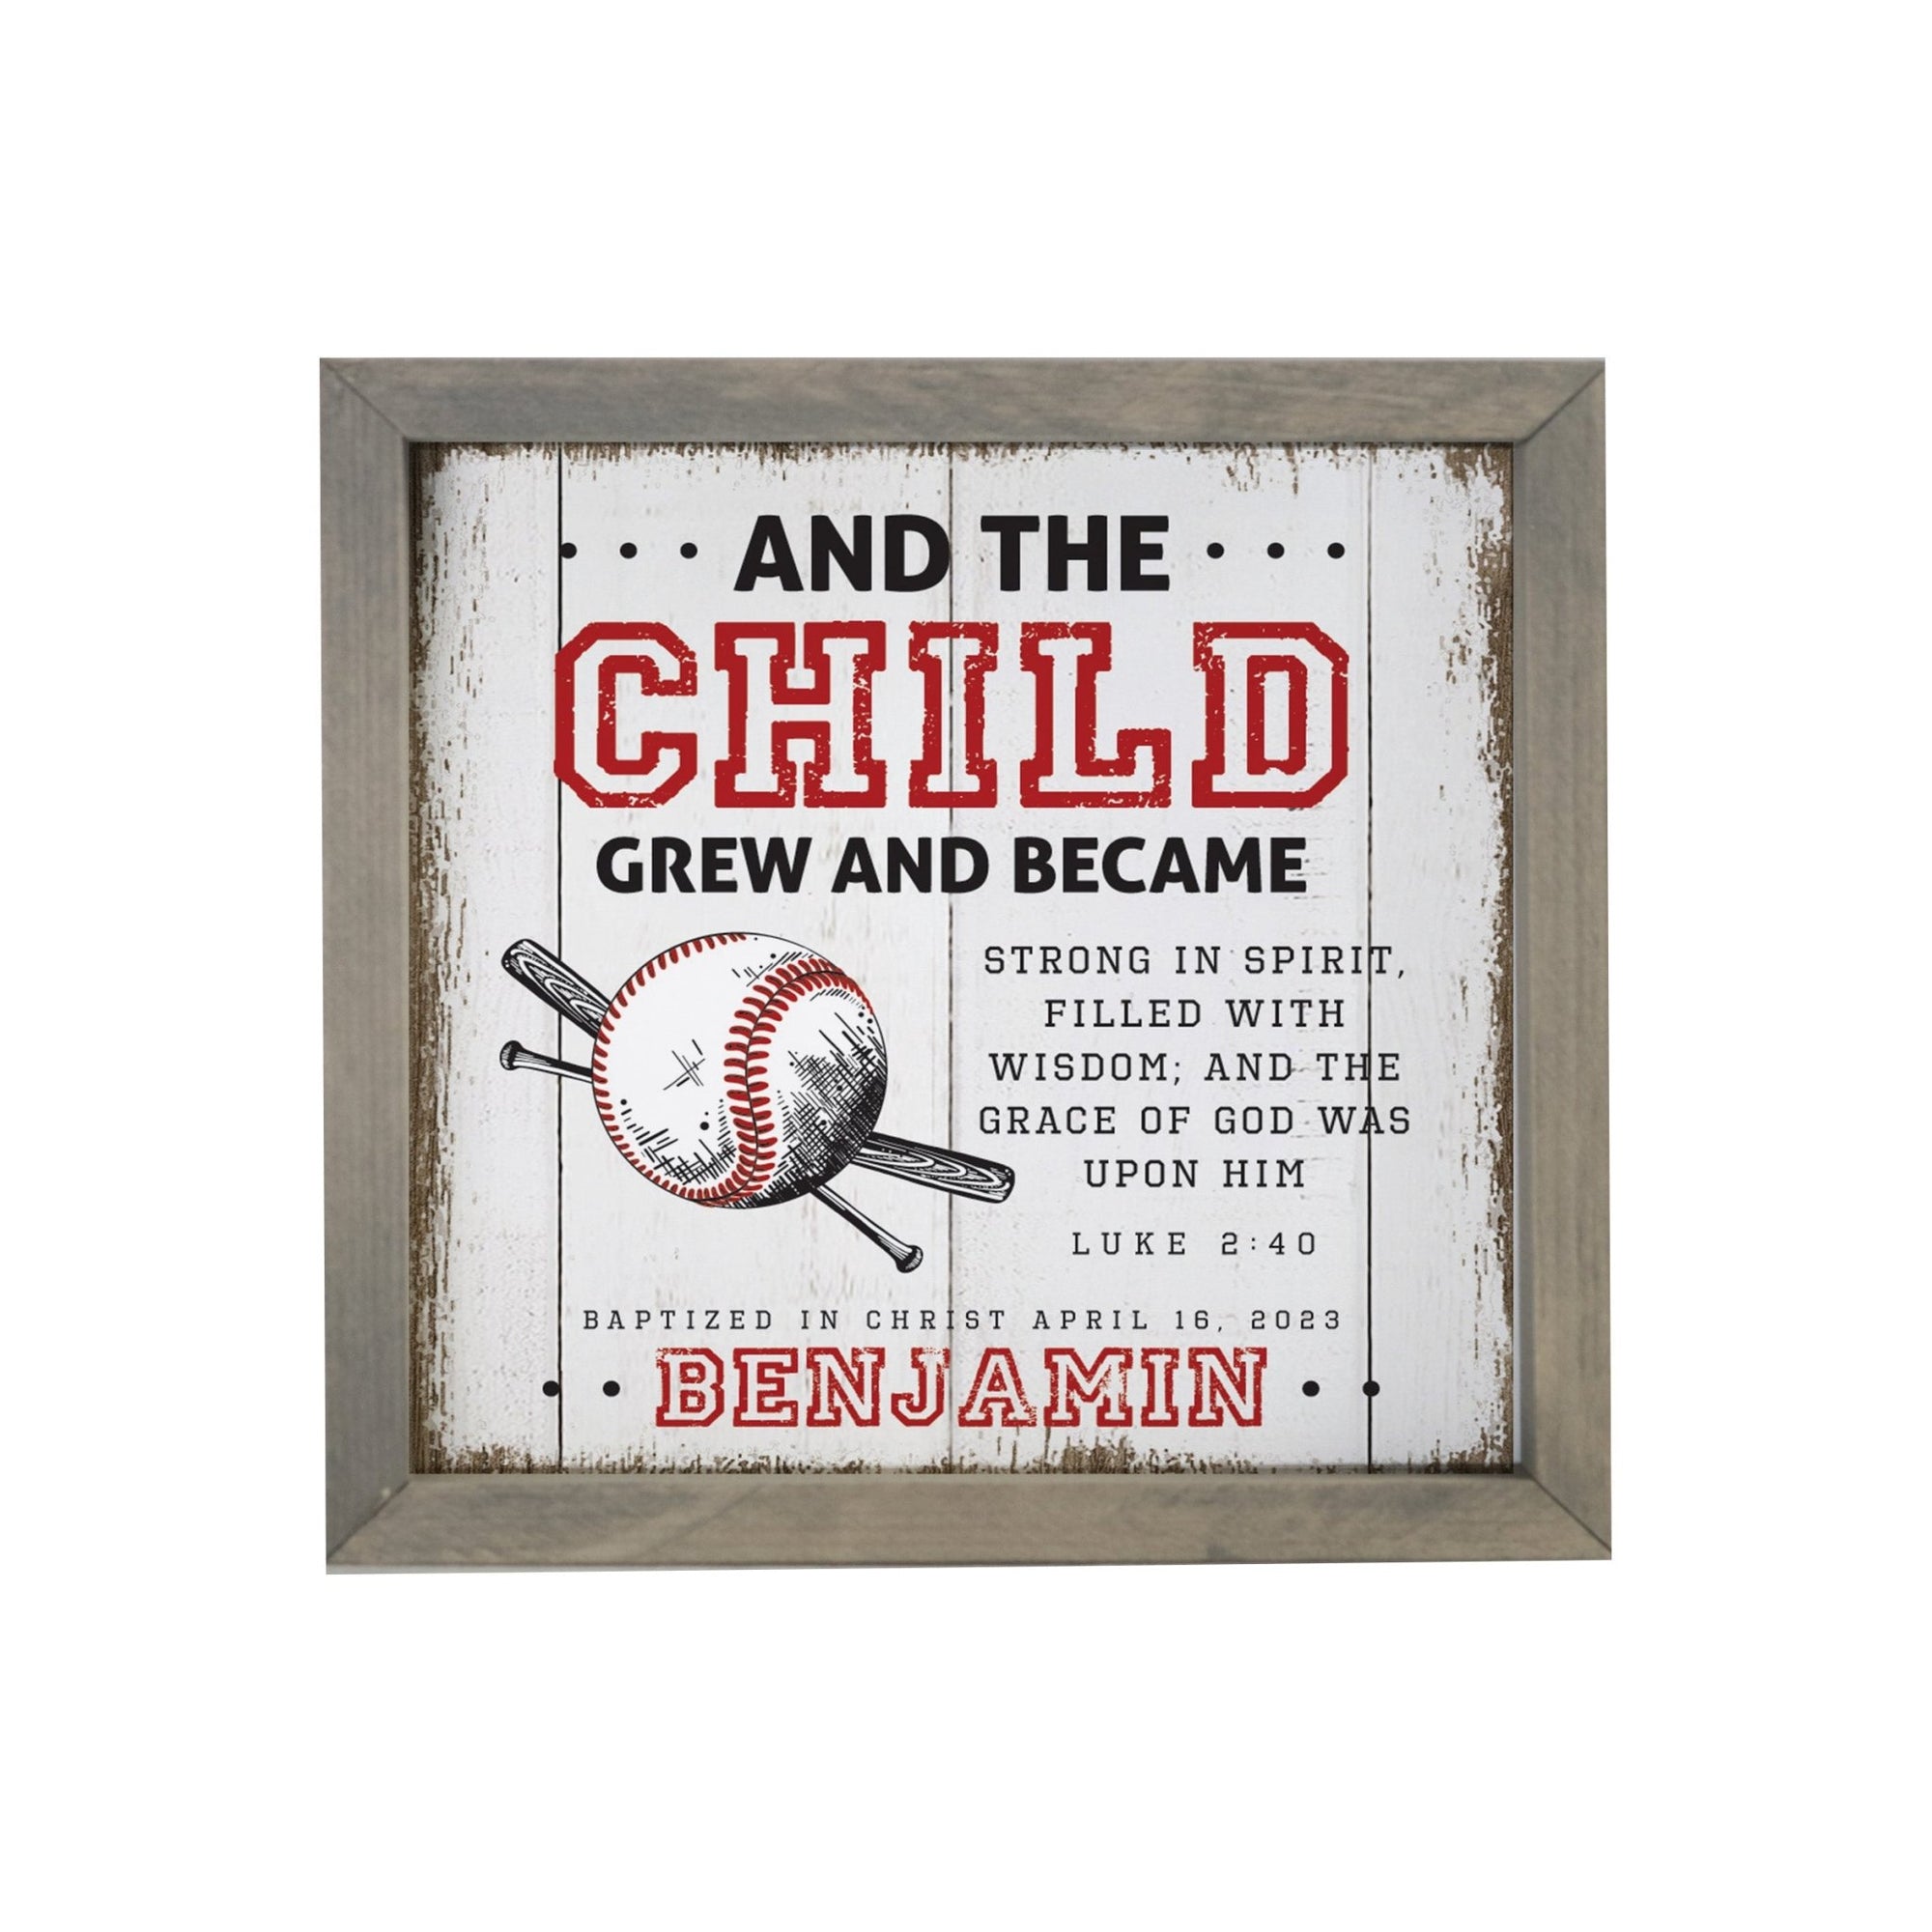 Personalized Elegant Baseball Framed Shadow Box Shelf Décor With Inspiring Bible Verses - And The Child Grew - LifeSong Milestones